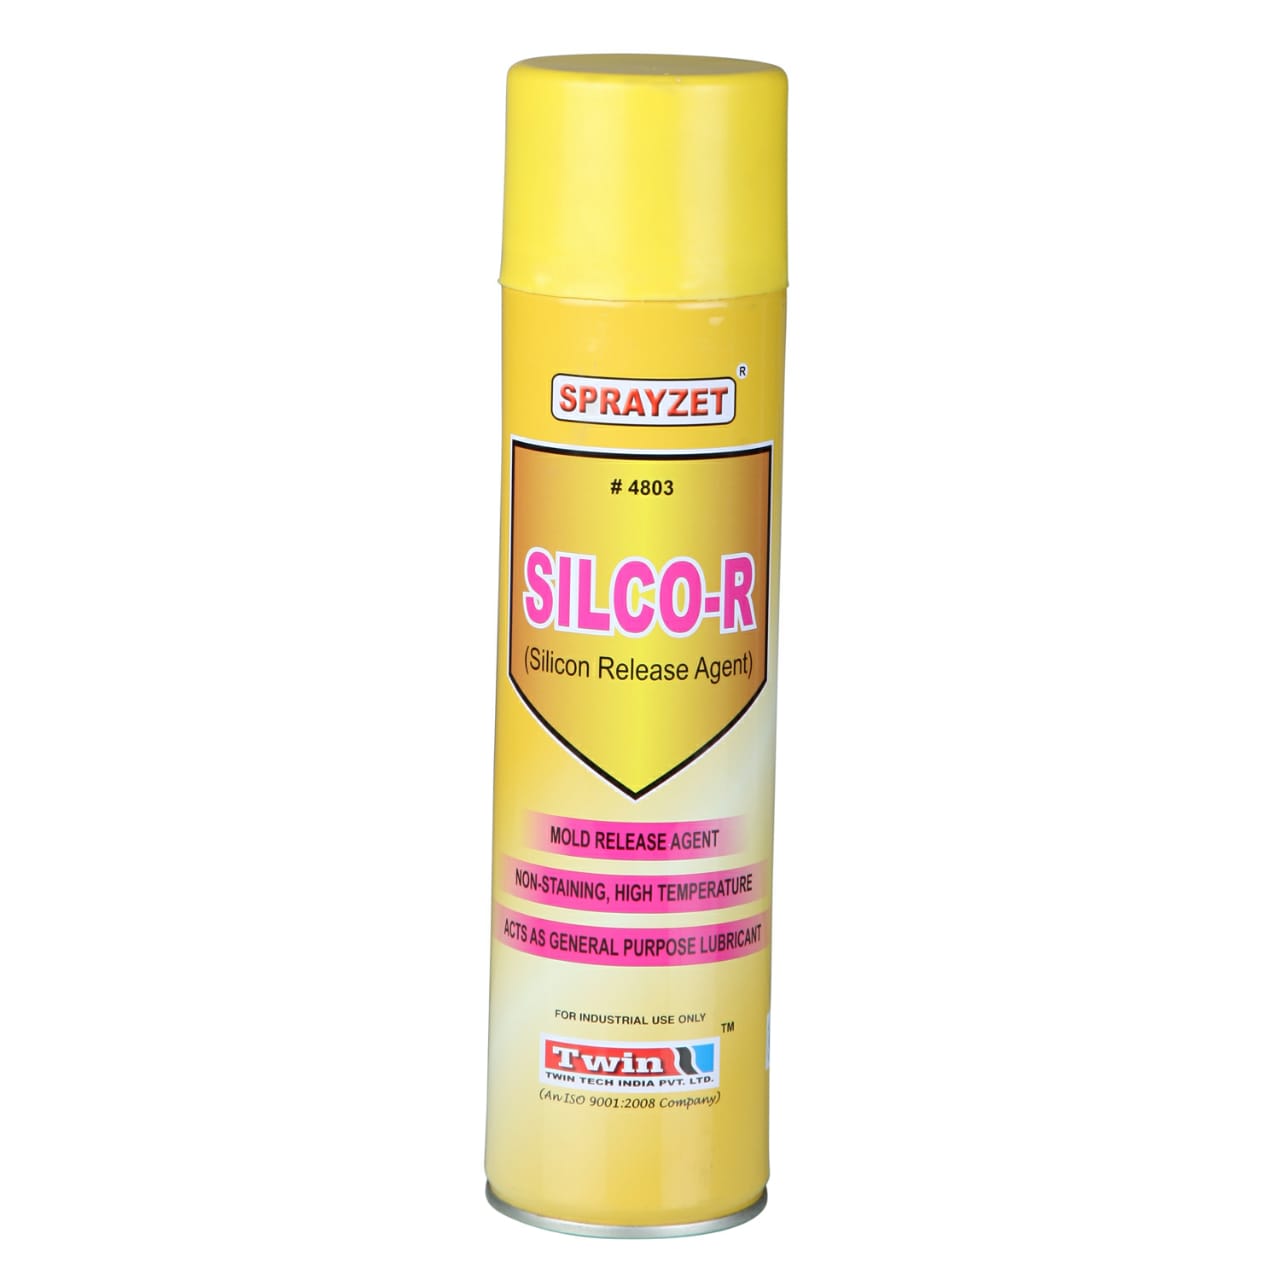 Silicone Spray for Mould Release Agent, Top Manufacturer, Brands in India